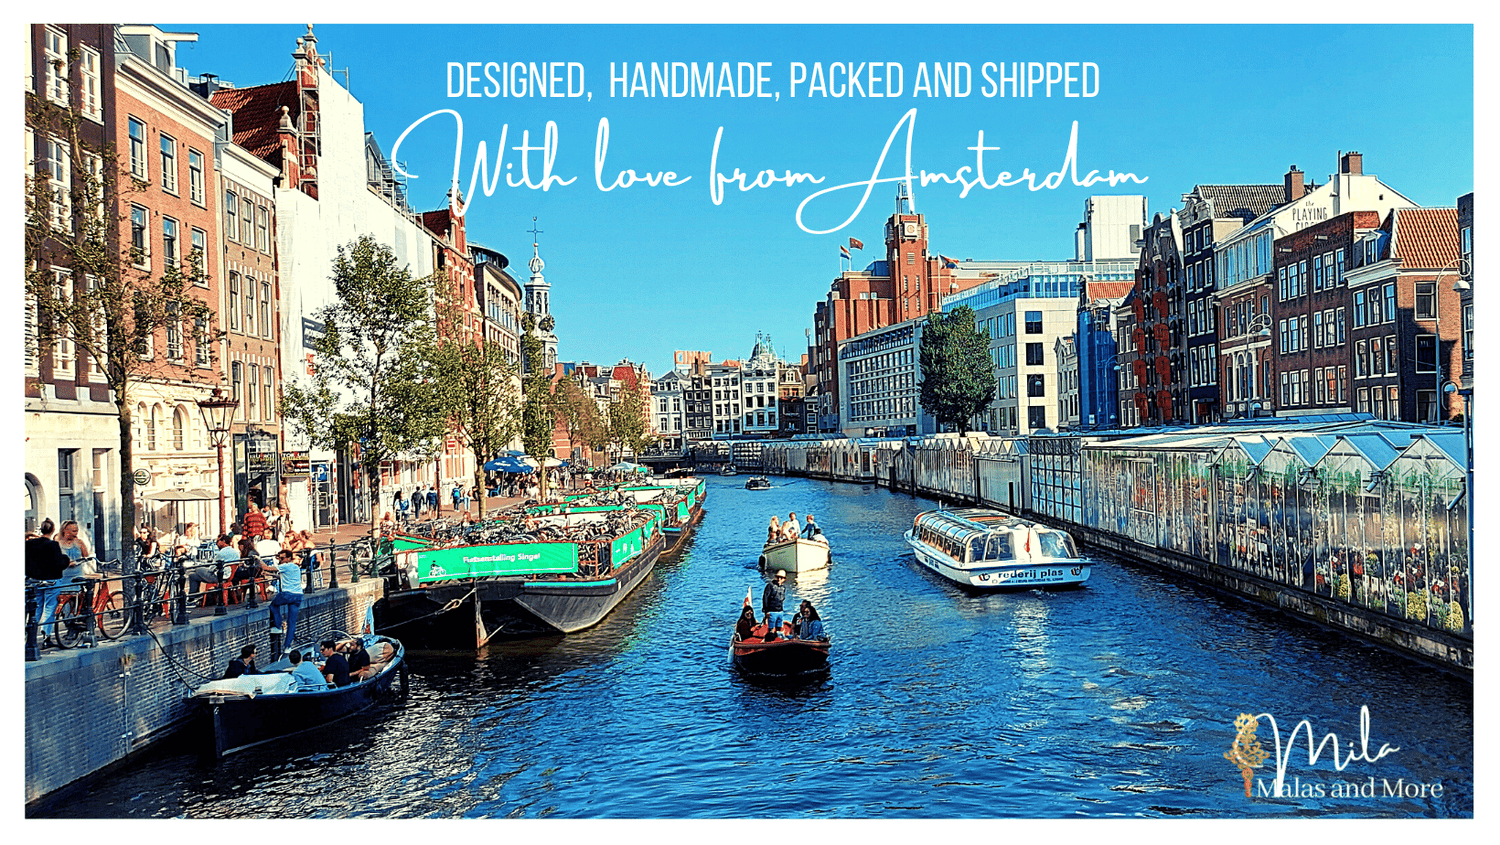 Boho Jewelry, Junk Journals, Digital Downloads, Printables designed, handmade, packed and shipped with love from Amsterdam by Sharmila Dewkinandan from Mila Malas and More